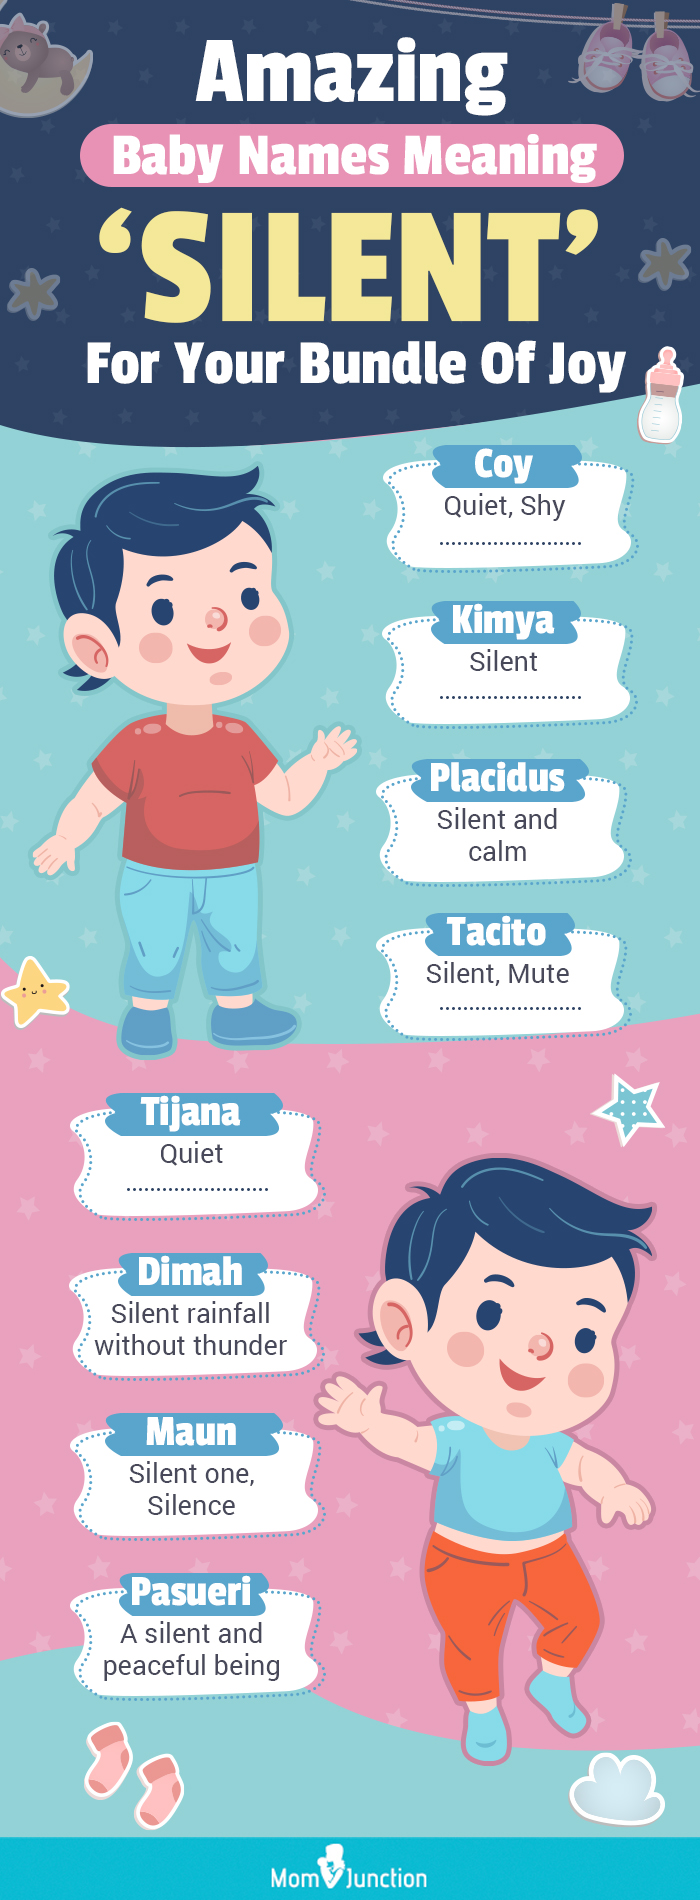 amazing baby names meaning silent for your bundle of joy (infographic)